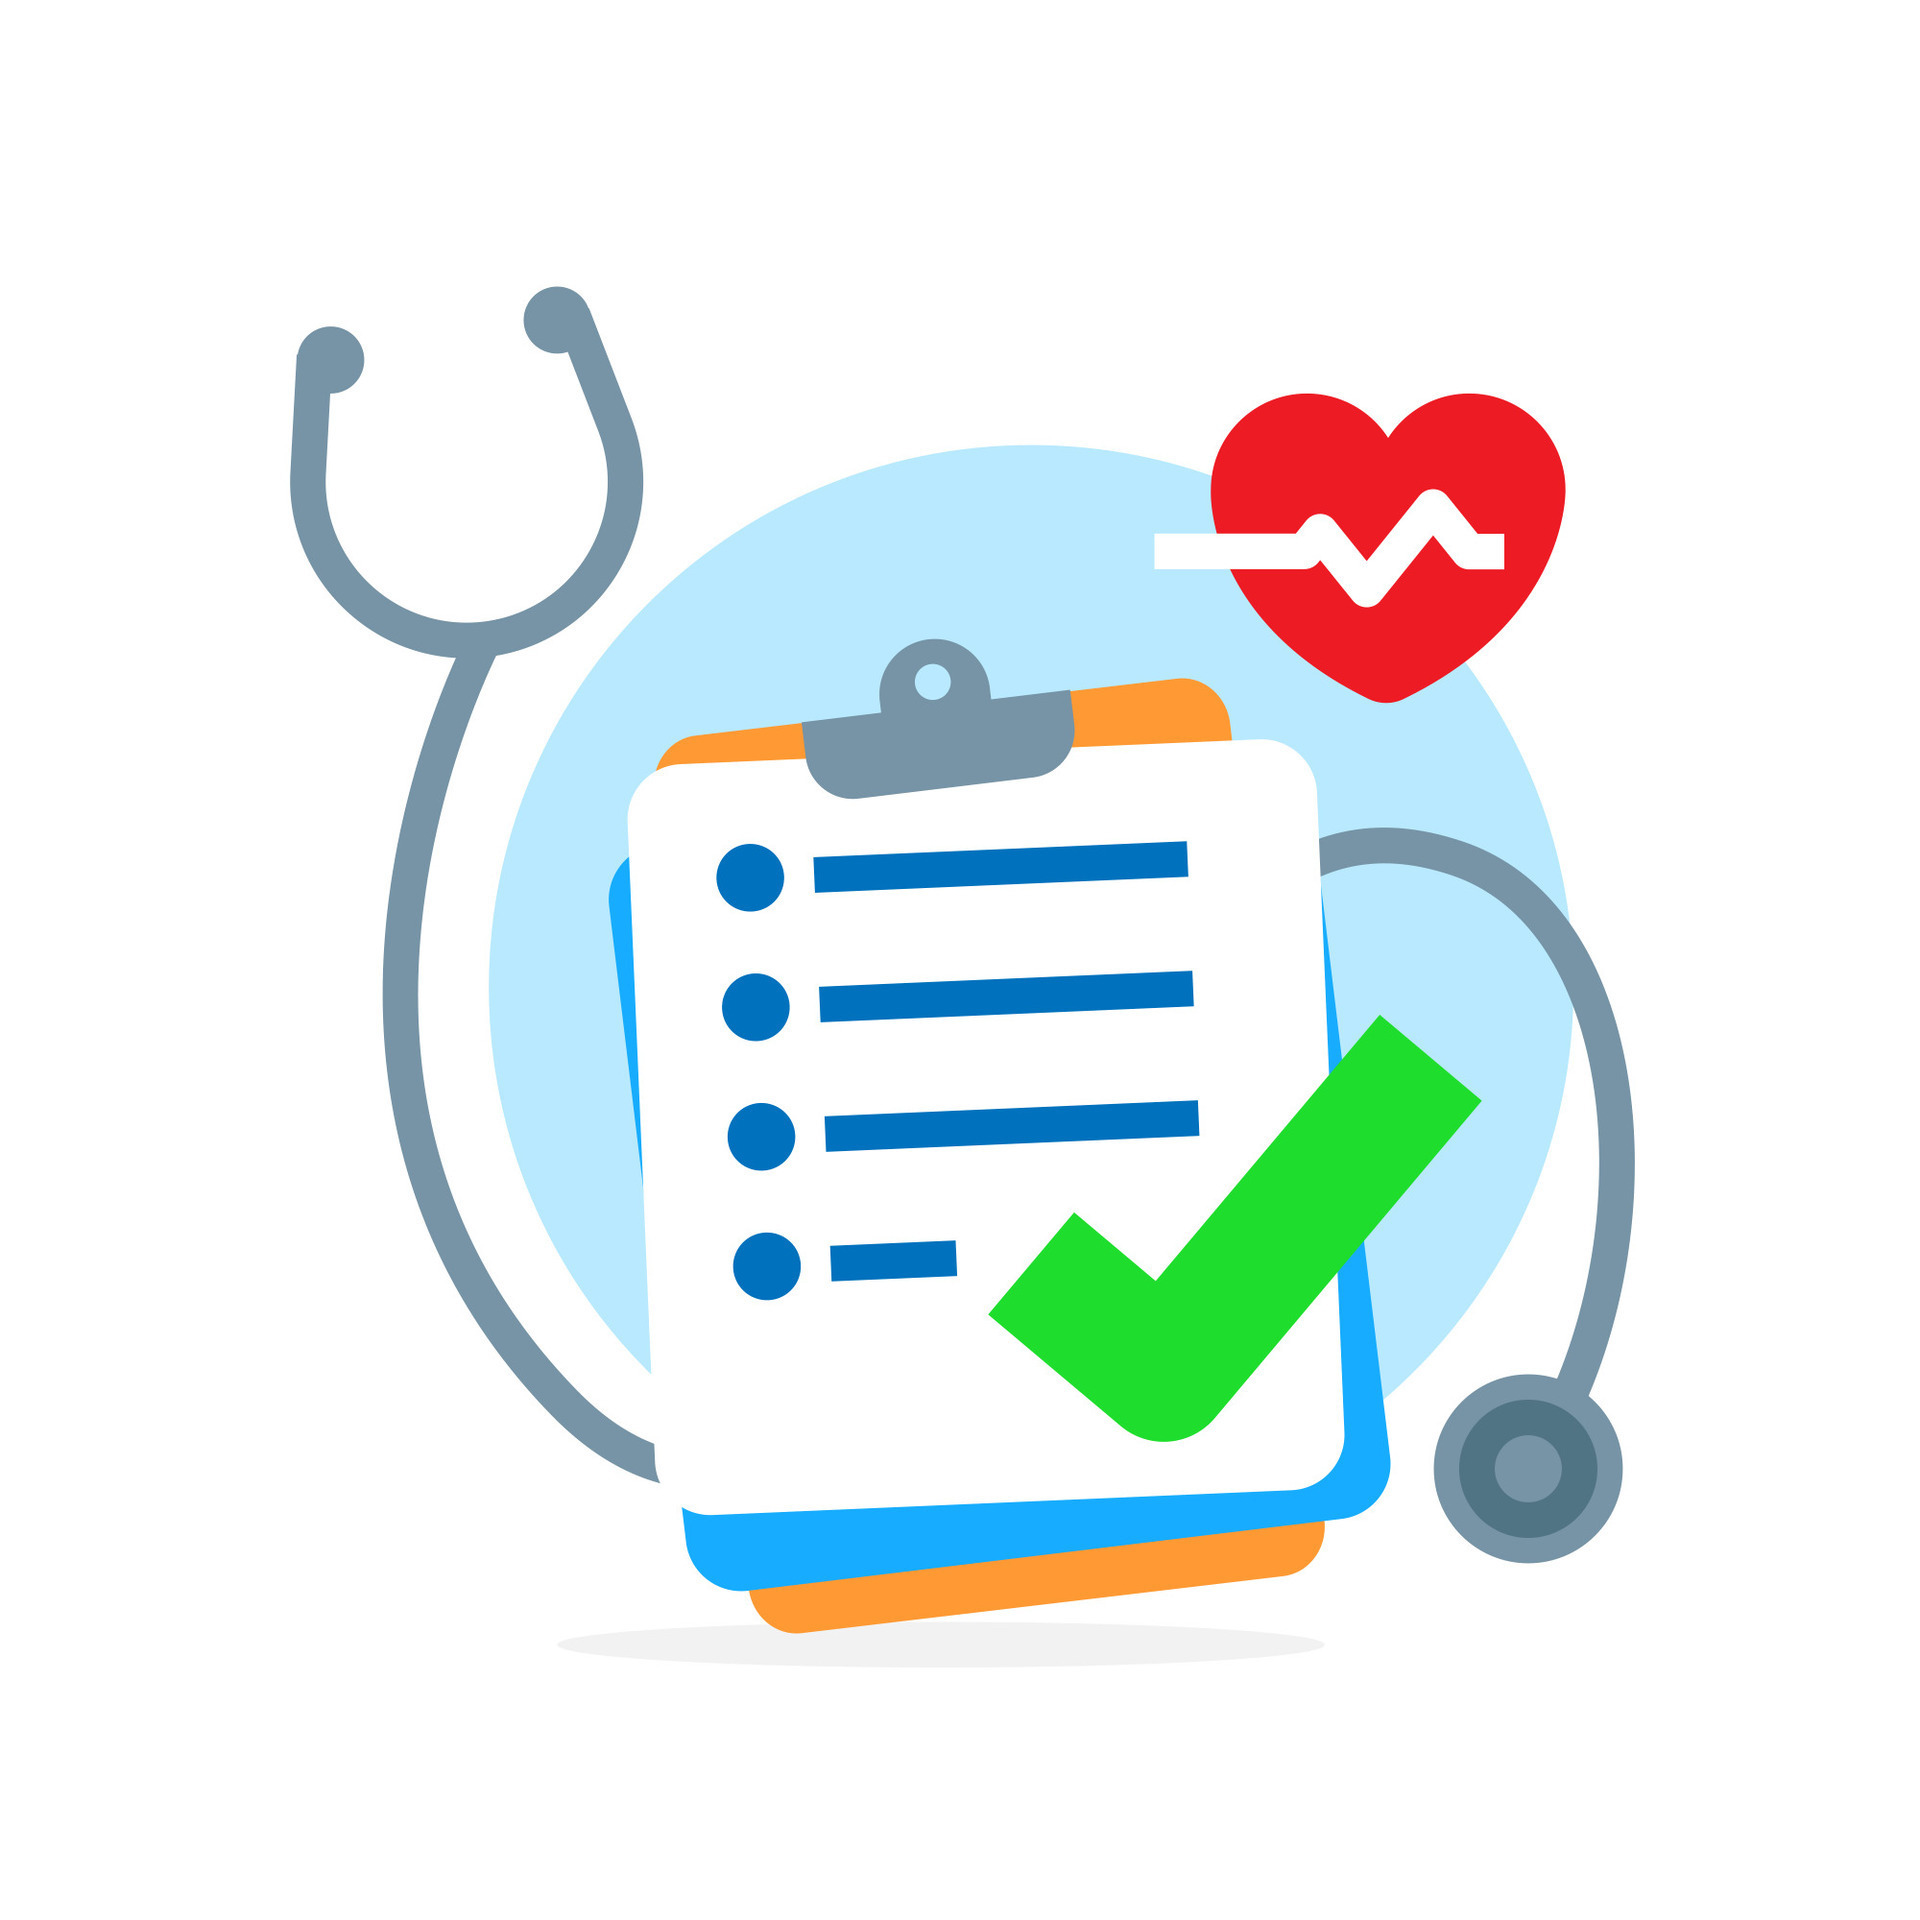 clipboard-with-stethoscope-medical-check-form-report-health-checkup-concept-illustration-flat-design-modern-graphic-element-for-landing-page-ui-infographic-icon-vector